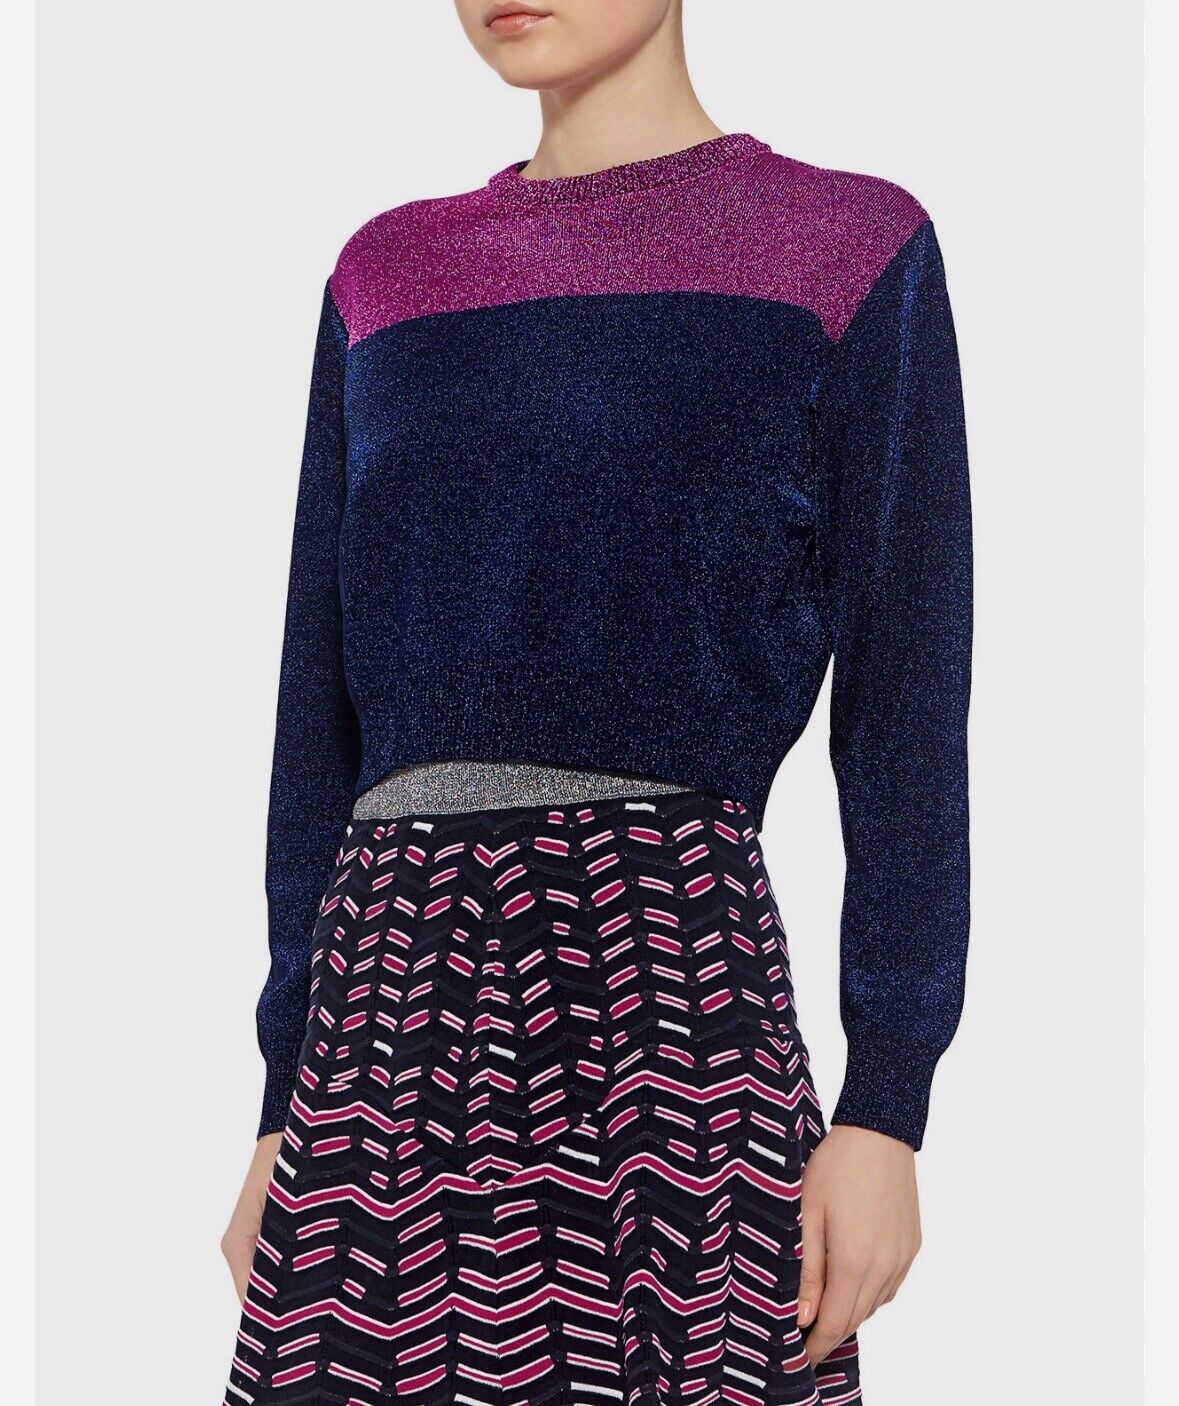 M Missoni Colorblock Blue & Pink Shimmer  Sweater Crop Top Size 38IT US 2